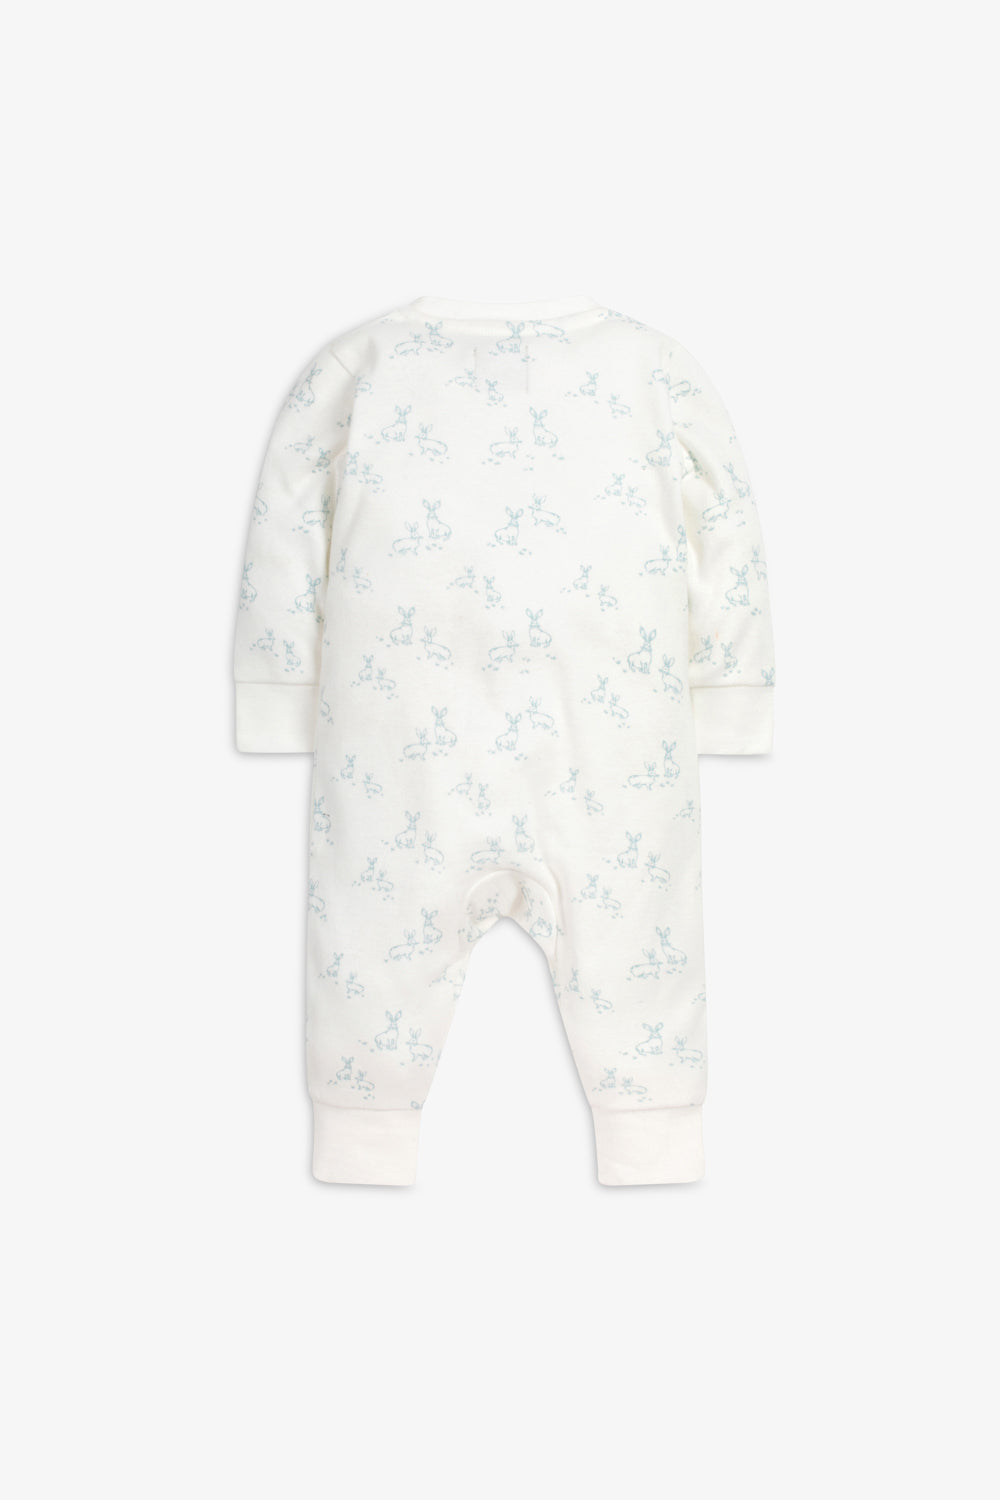 Sleepsuit and Bunny Gift Set, little blue hare print